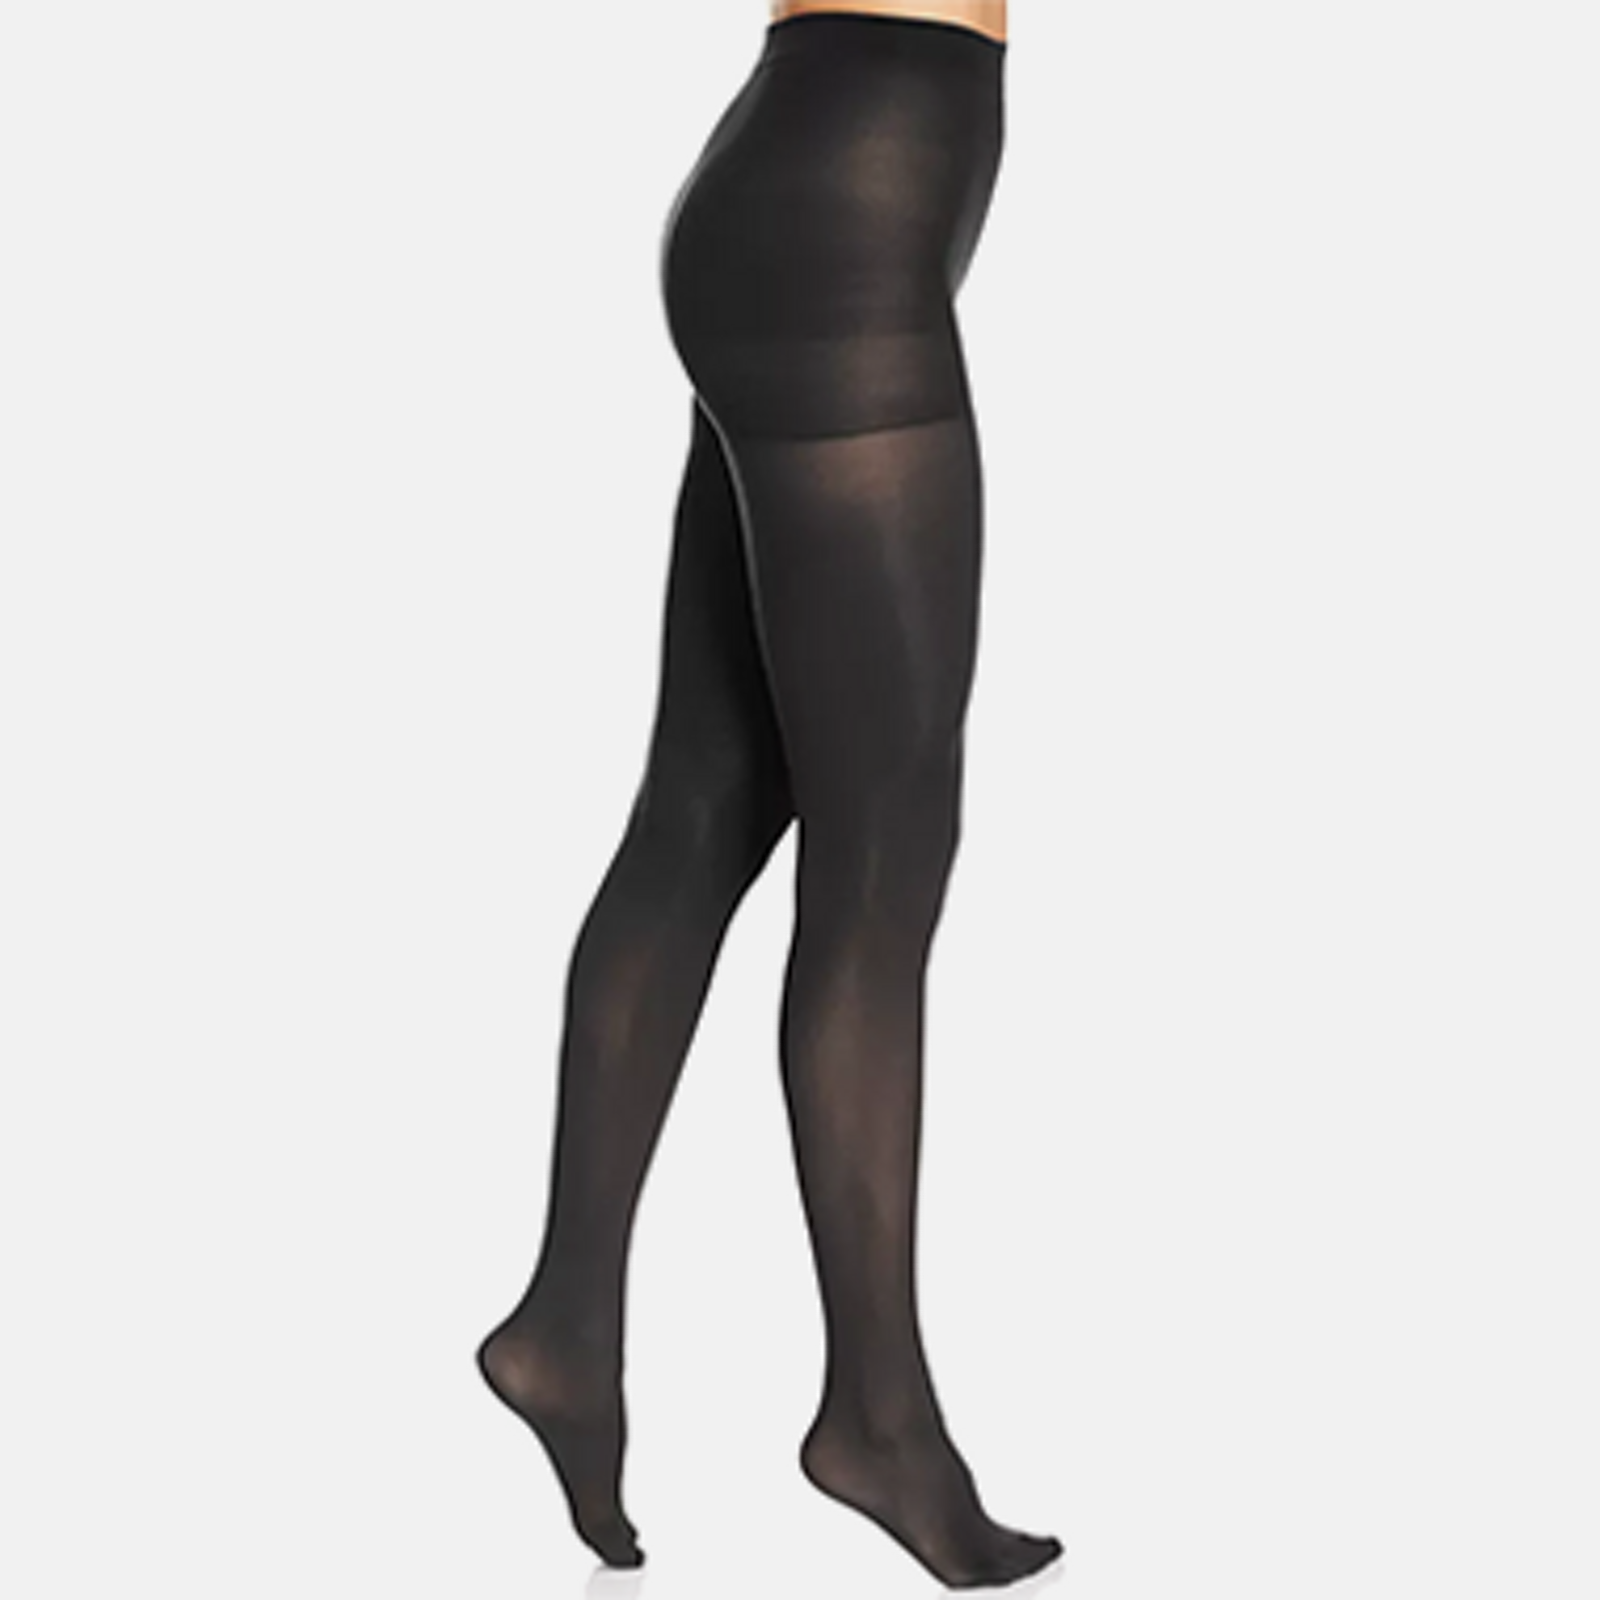  Women's Tights - Capezio / Women's Tights / Women's Socks &  Hosiery: Clothing, Shoes & Jewelry